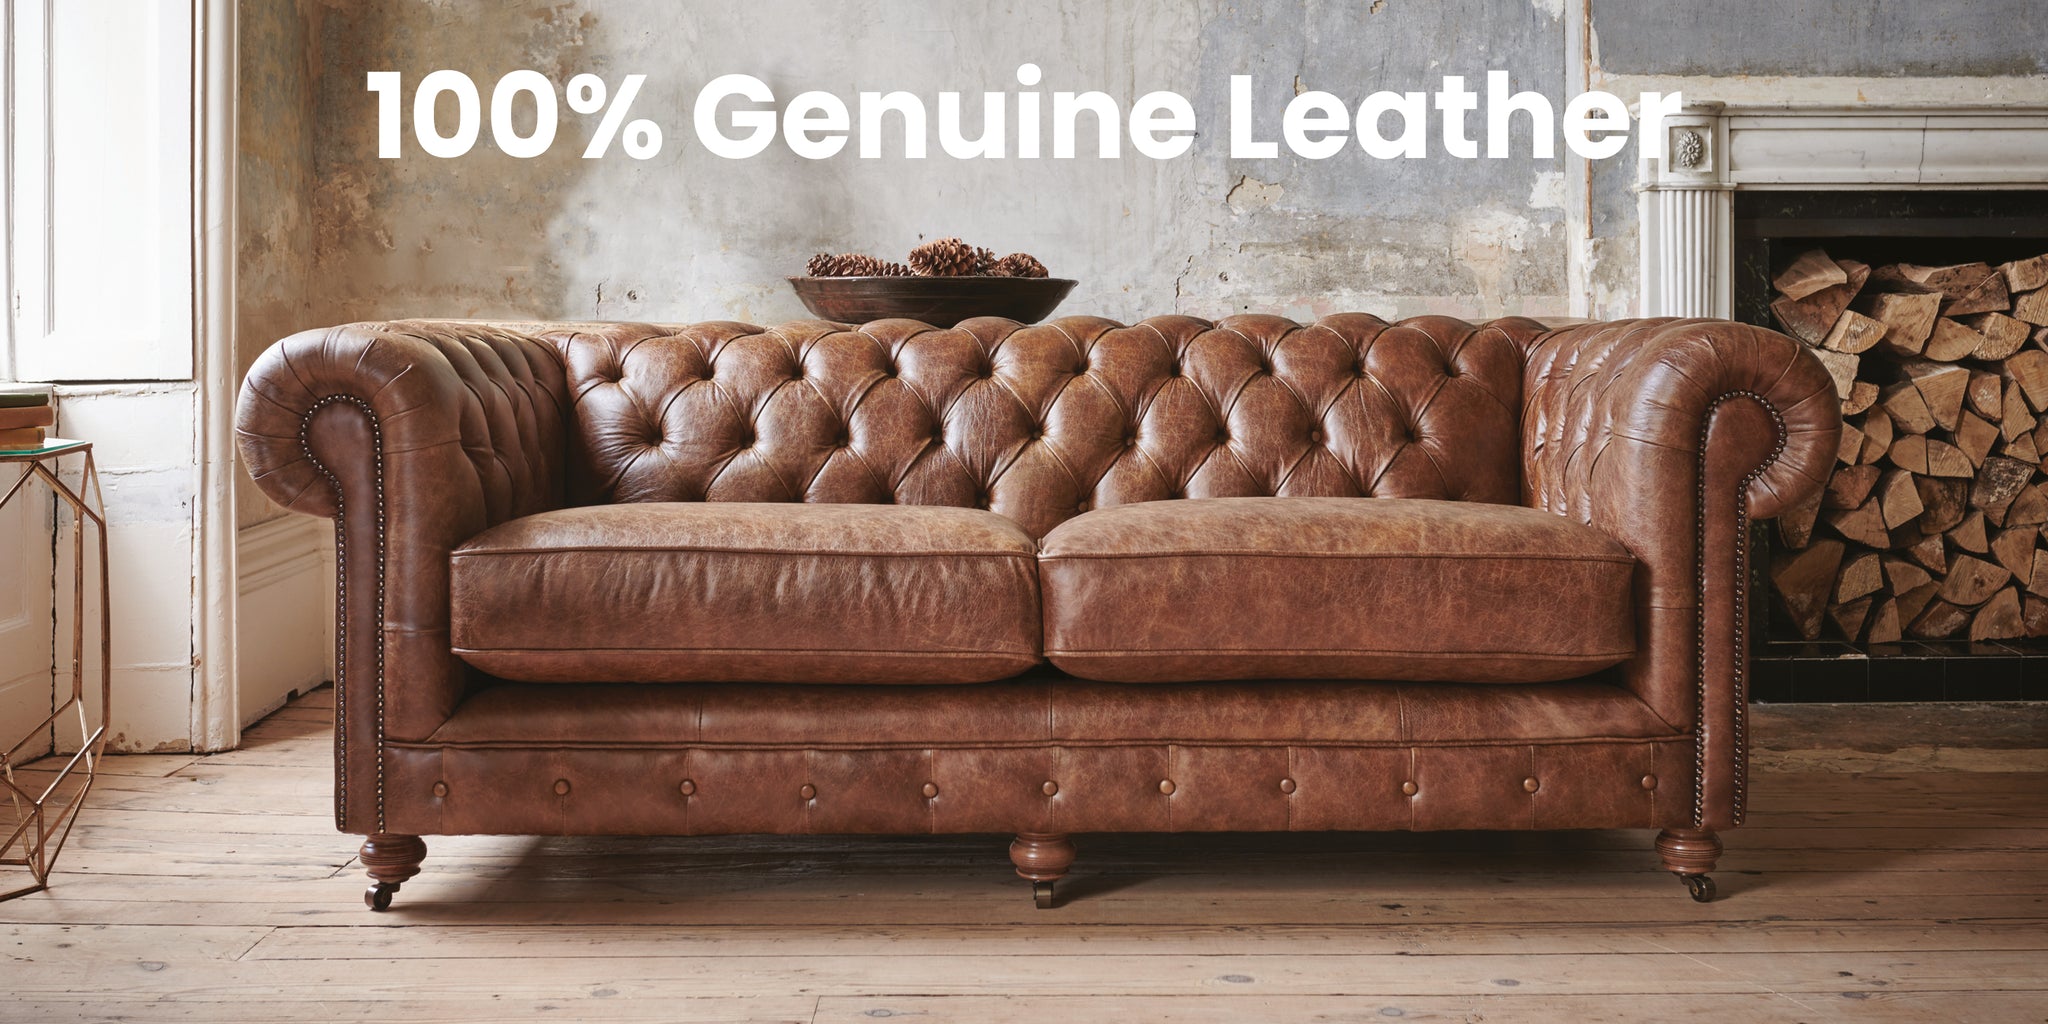 How to tell real leather from fake